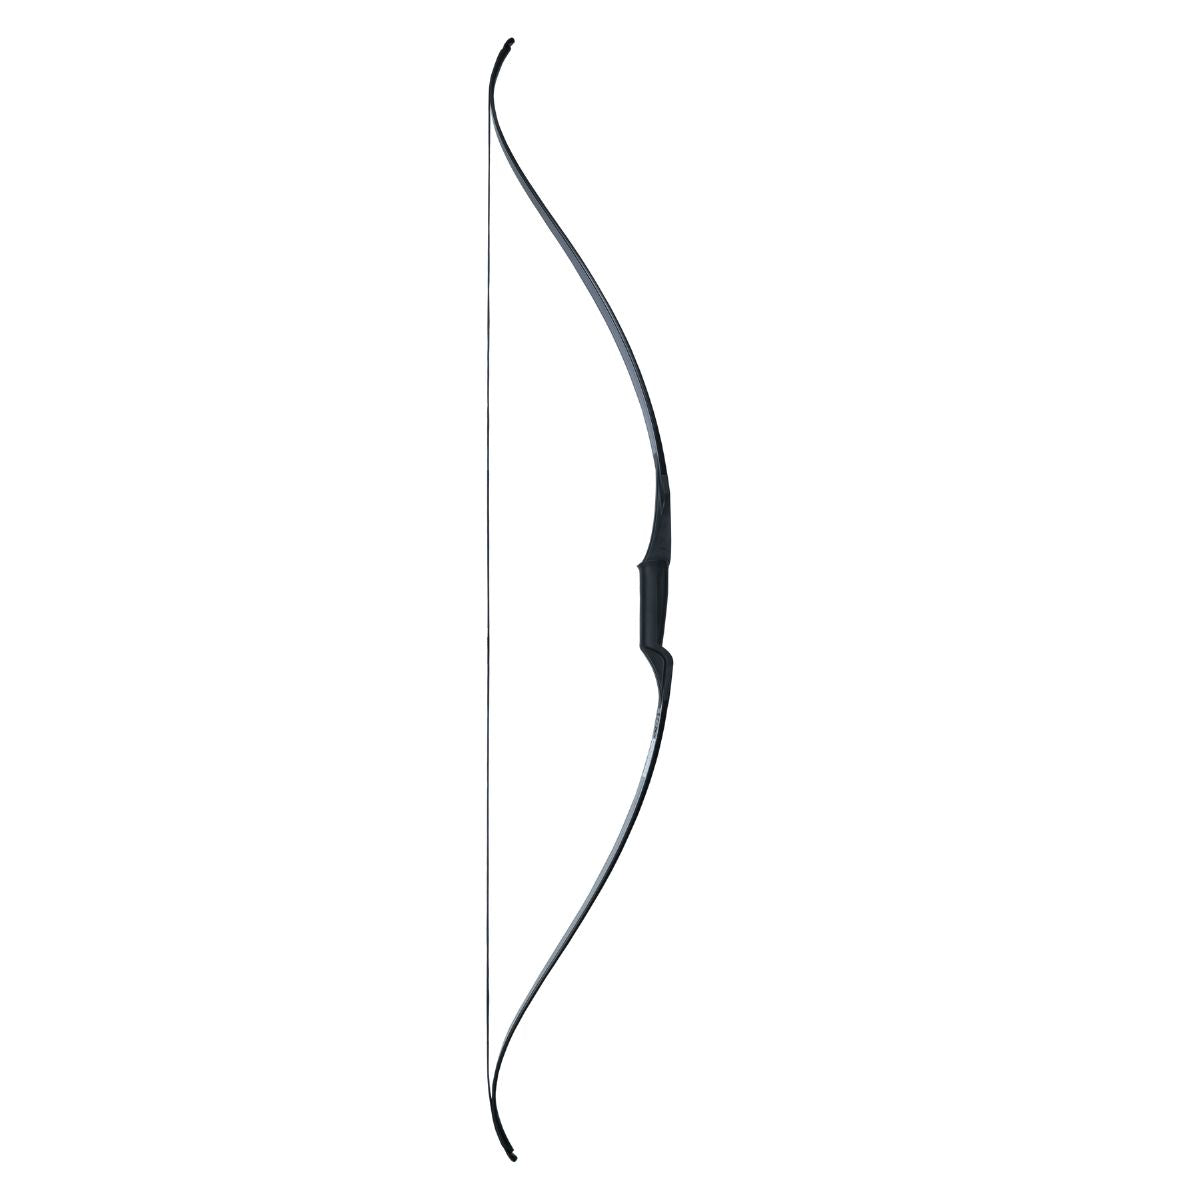 Serpent Ambidextrous Re-Curve Bow - AS-R123 1